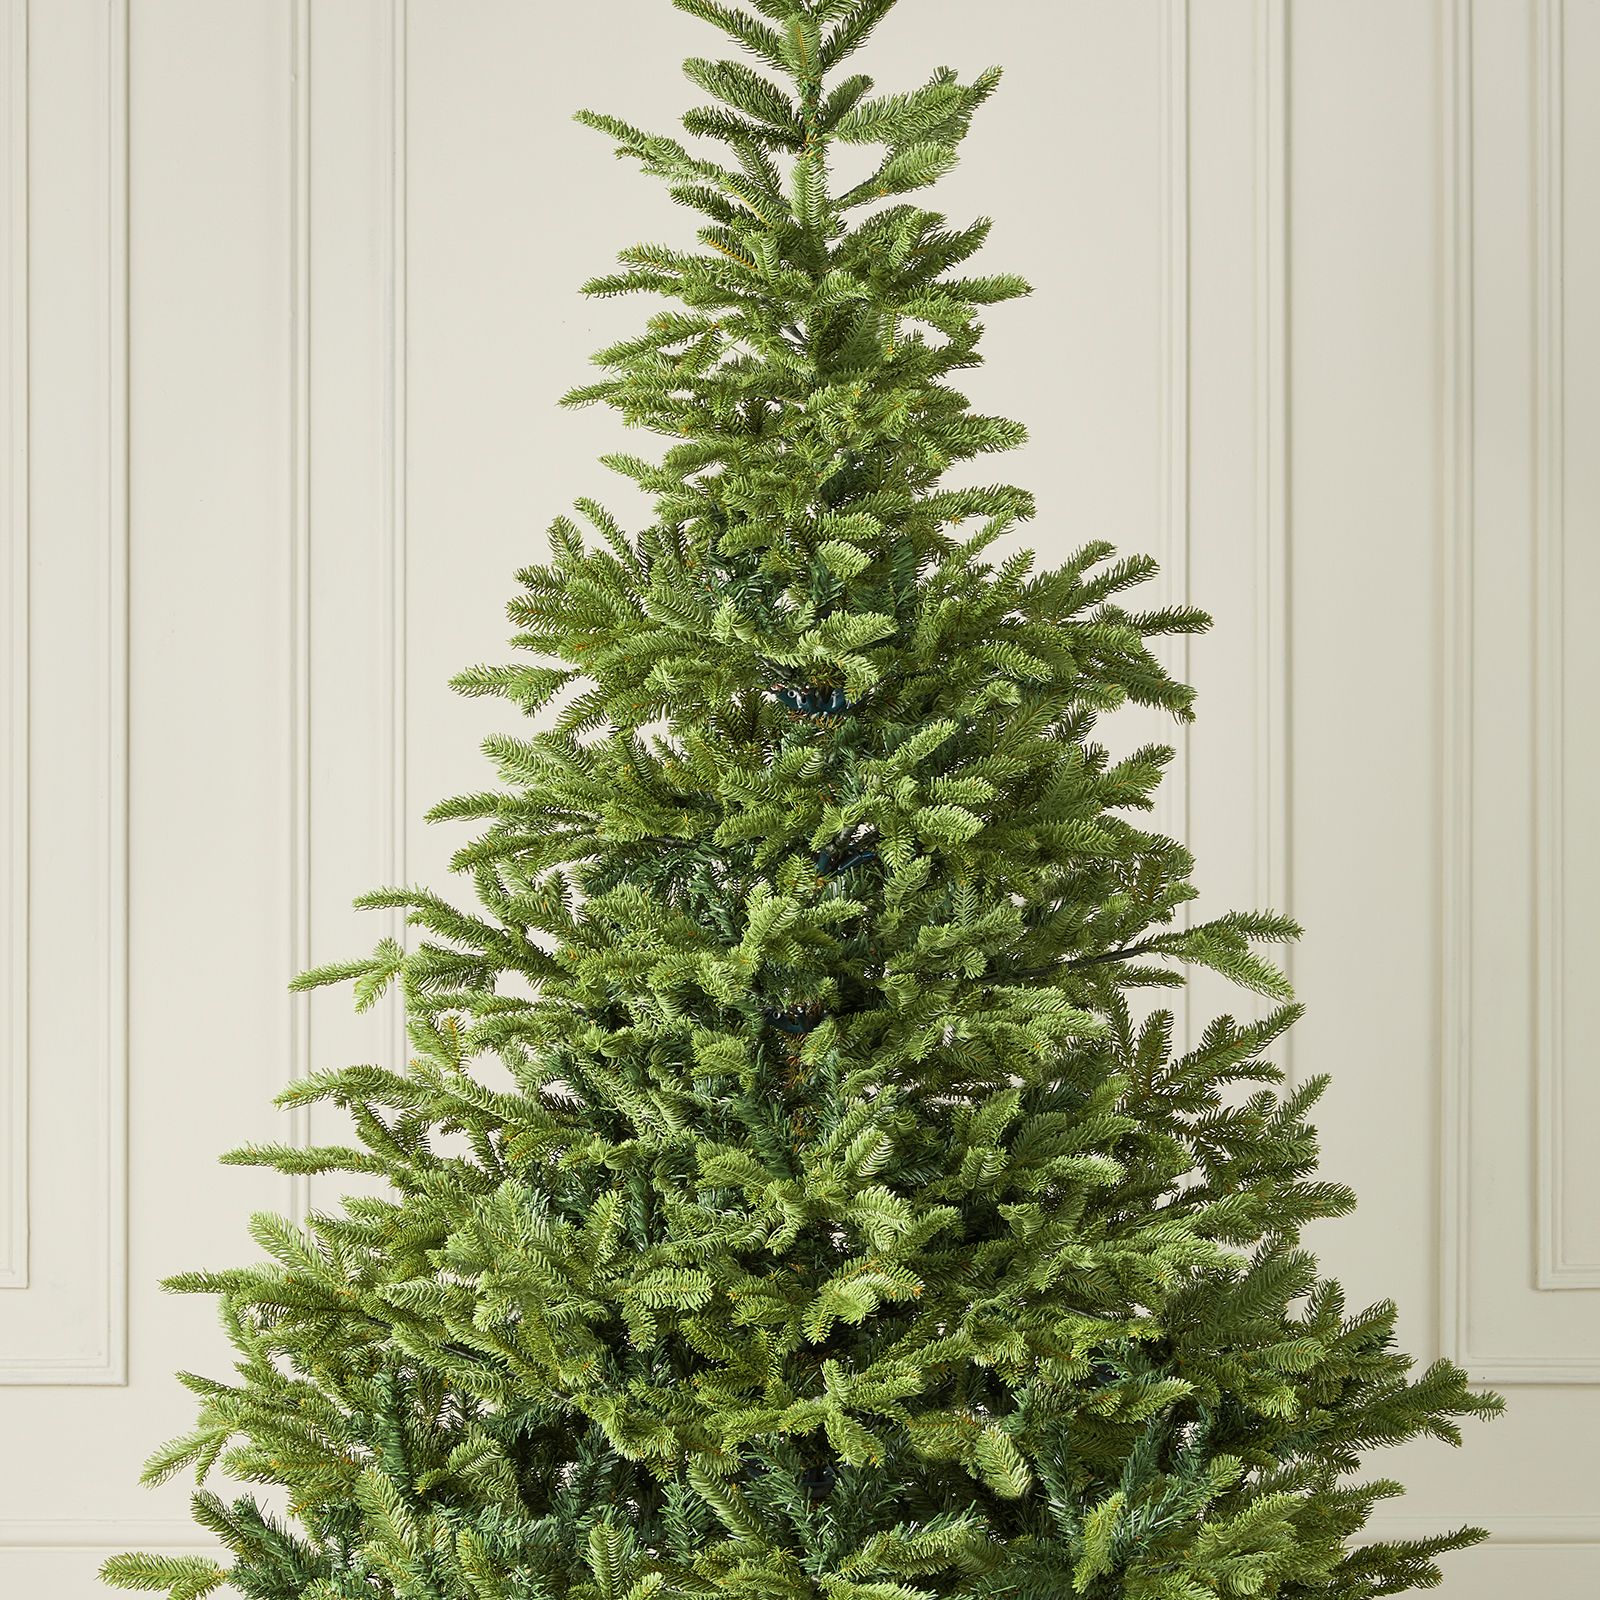 Englemanns Spruce Artificial Christmas Tree